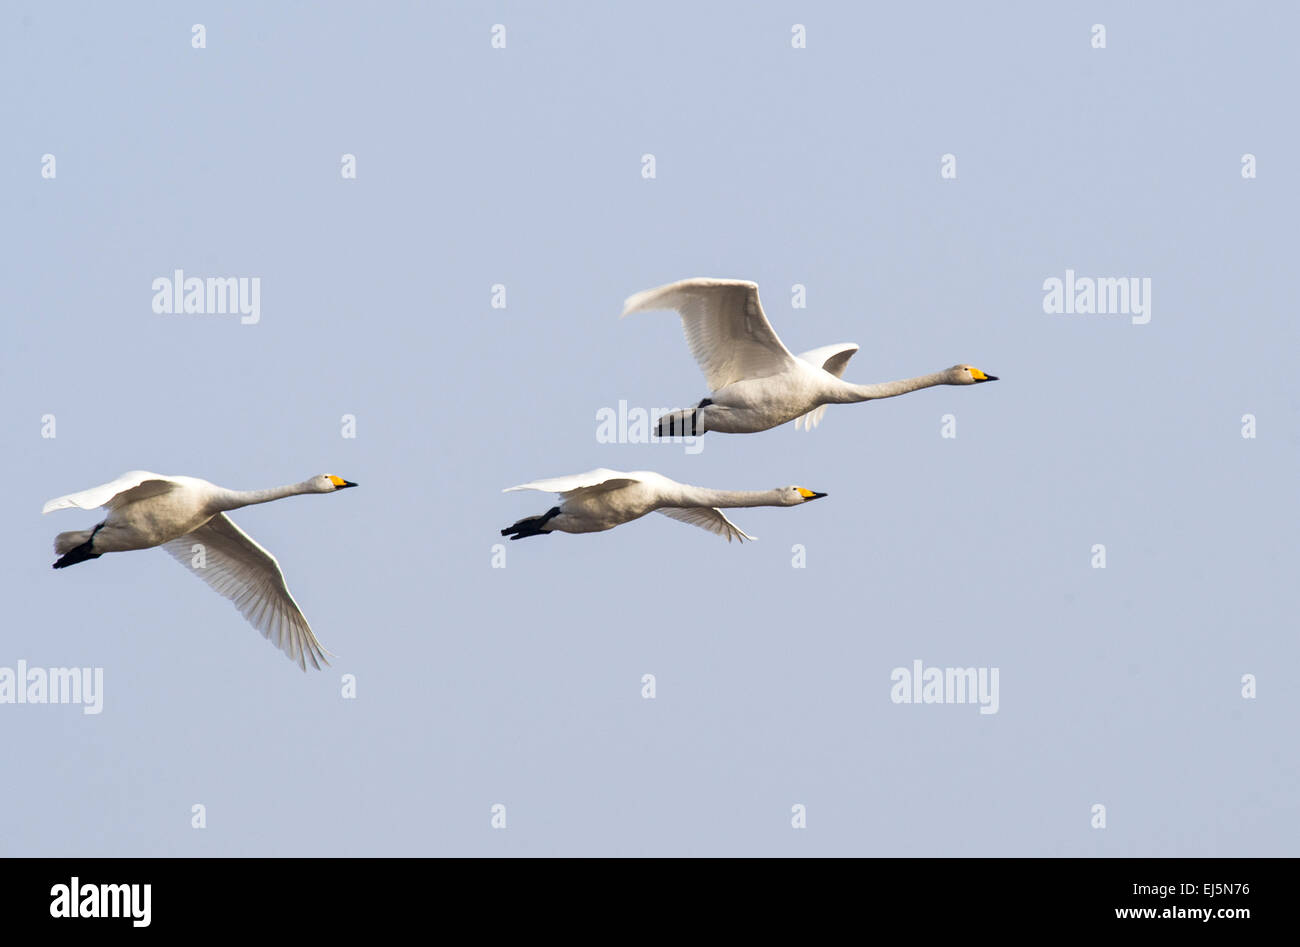 Three whoopee birds, swans flying in to the frame from left in the image Stock Photo